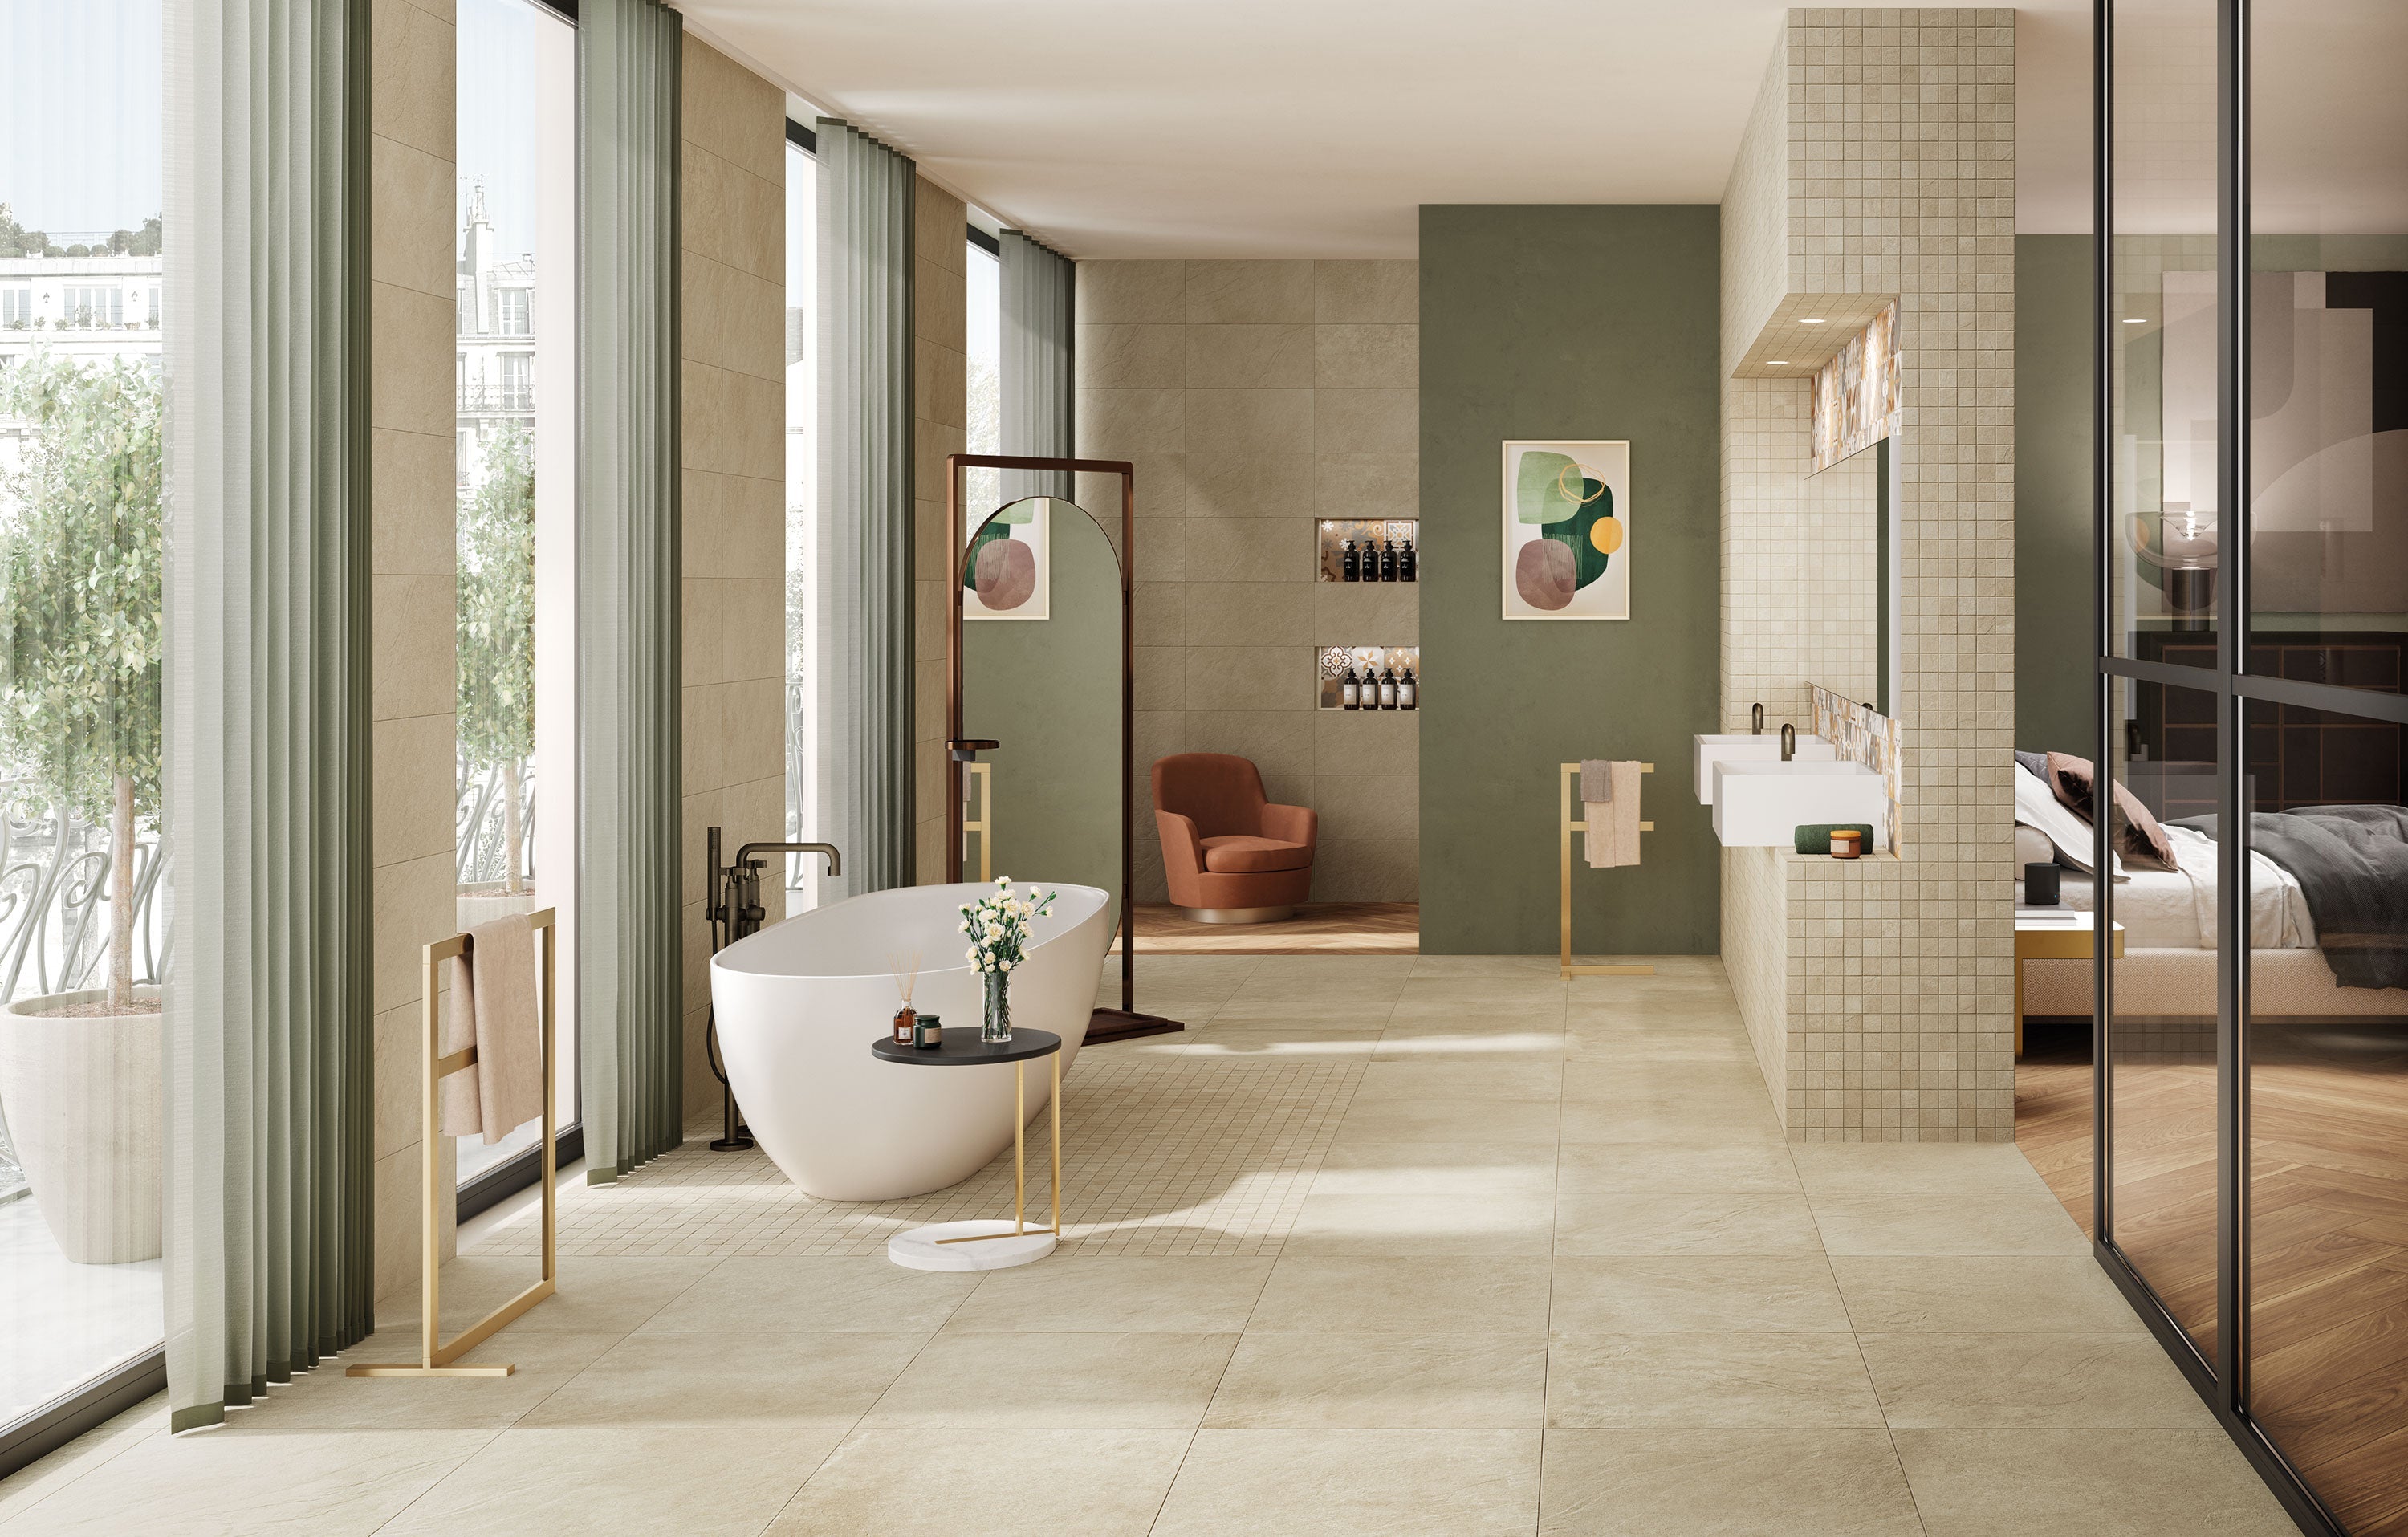 Luxurious bathroom with MadeIn porcelain tile collection by Surface Group, featuring elegant beige floor tiles and textured green wall tiles in a modern home setting.